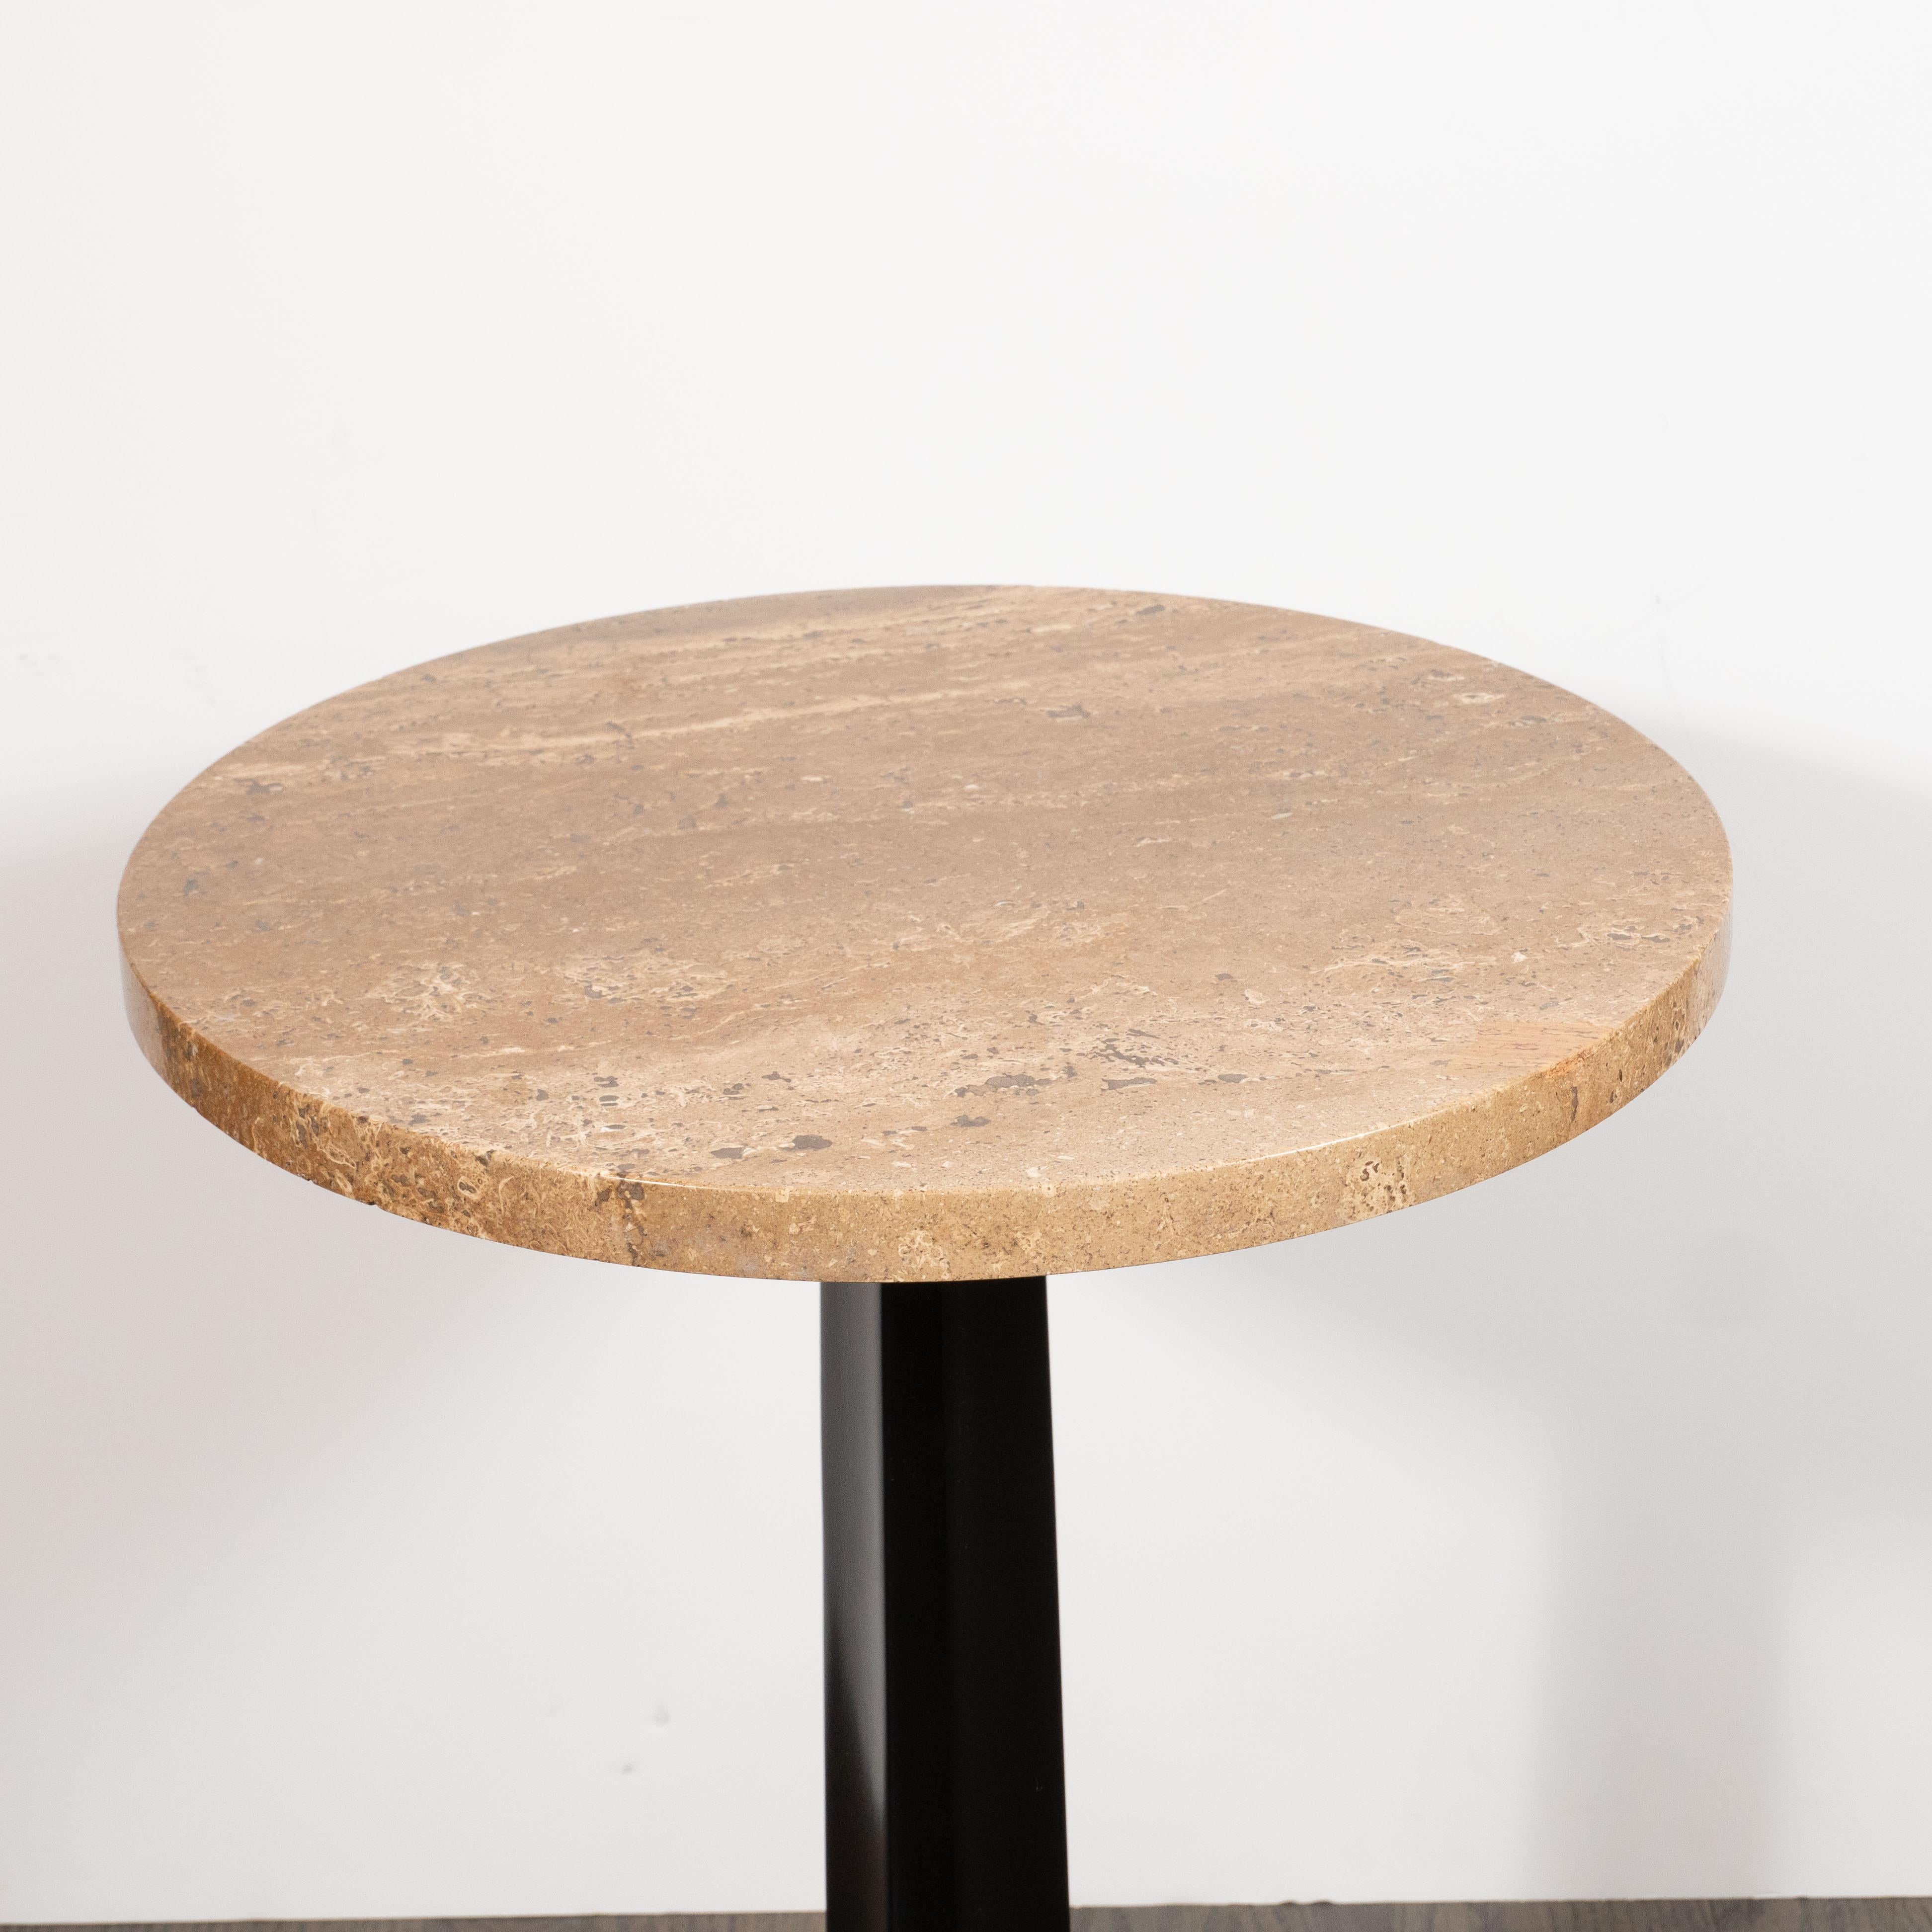 This sophisticated Mid-Century Modern tripod side table was designed by Edward Wormley for Dunbar, circa 1950. It features three stylized scroll form feet that attach to a hexagonal base which supports a circular top made of exotic travertine. With